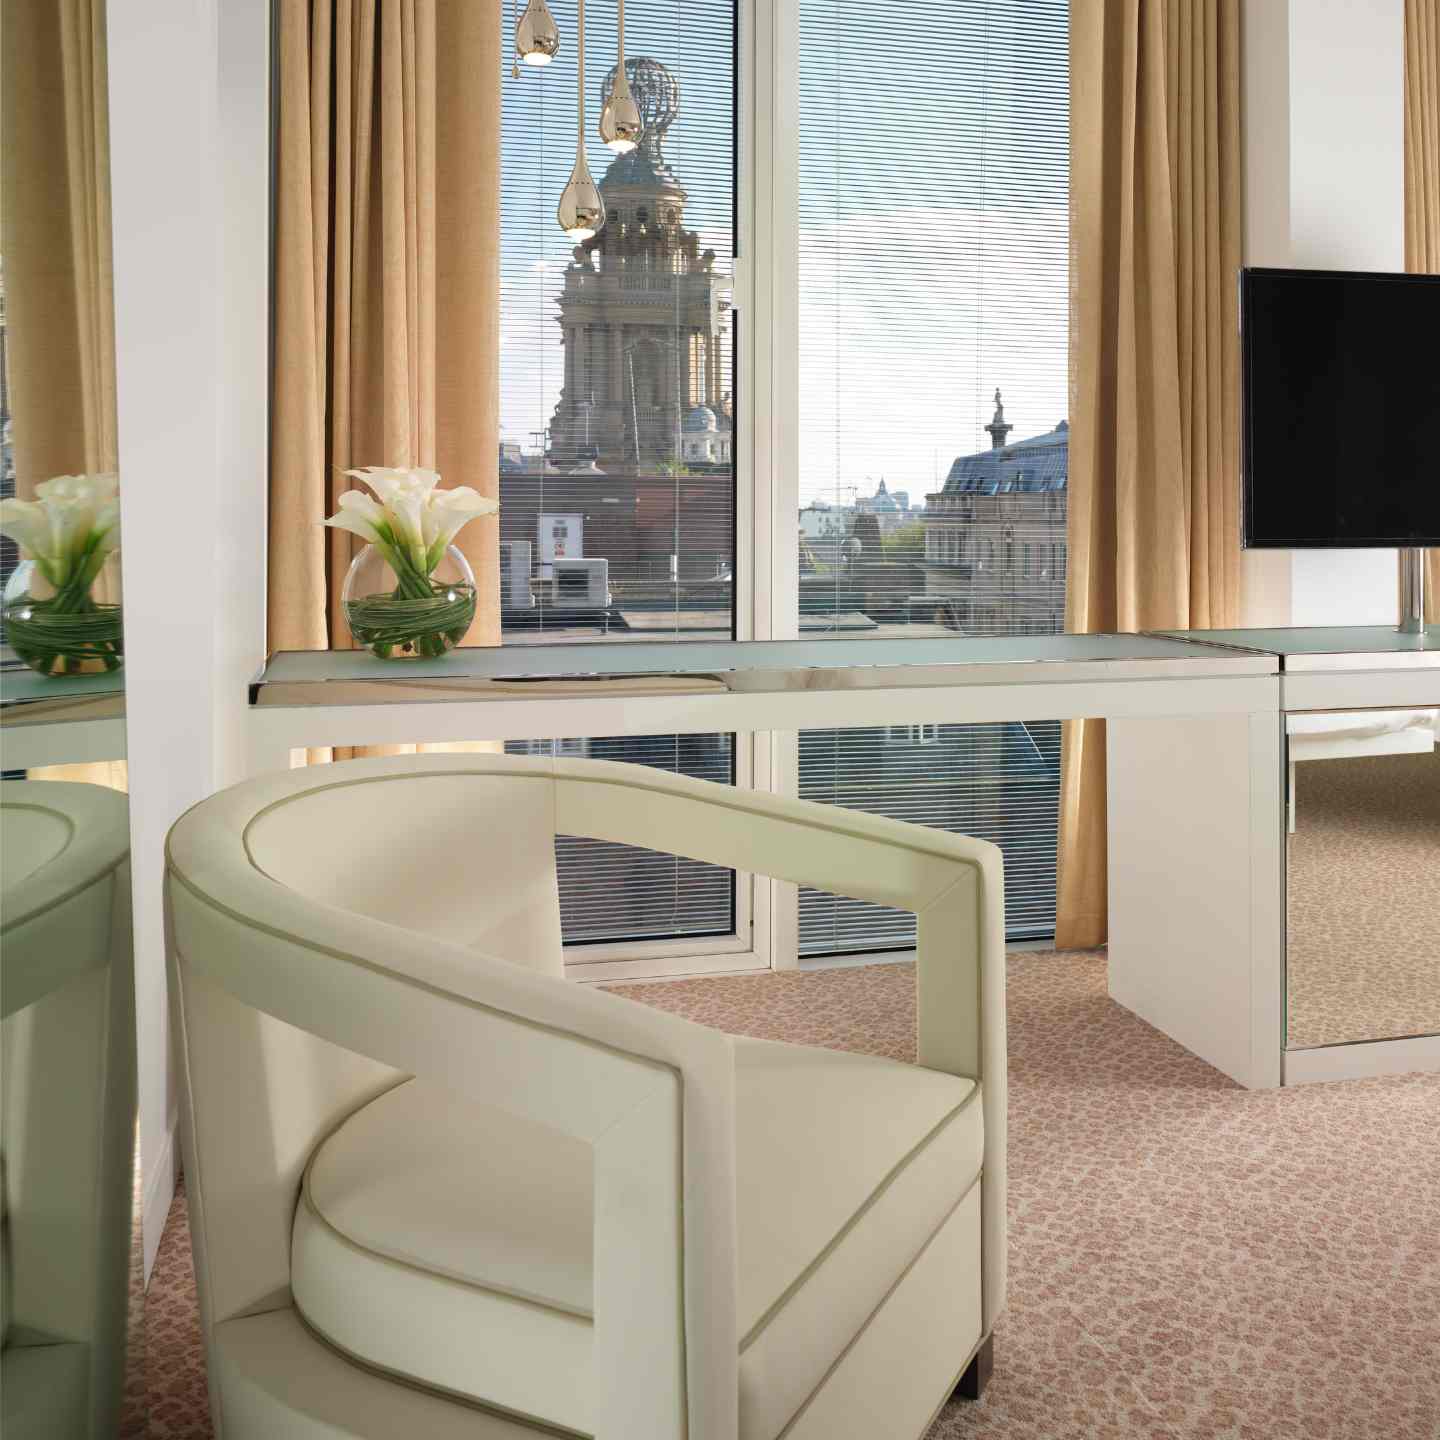 White leather chair with studs and white desk with flowers on it, floor-to-ceiling windows with beige curtains and views of London